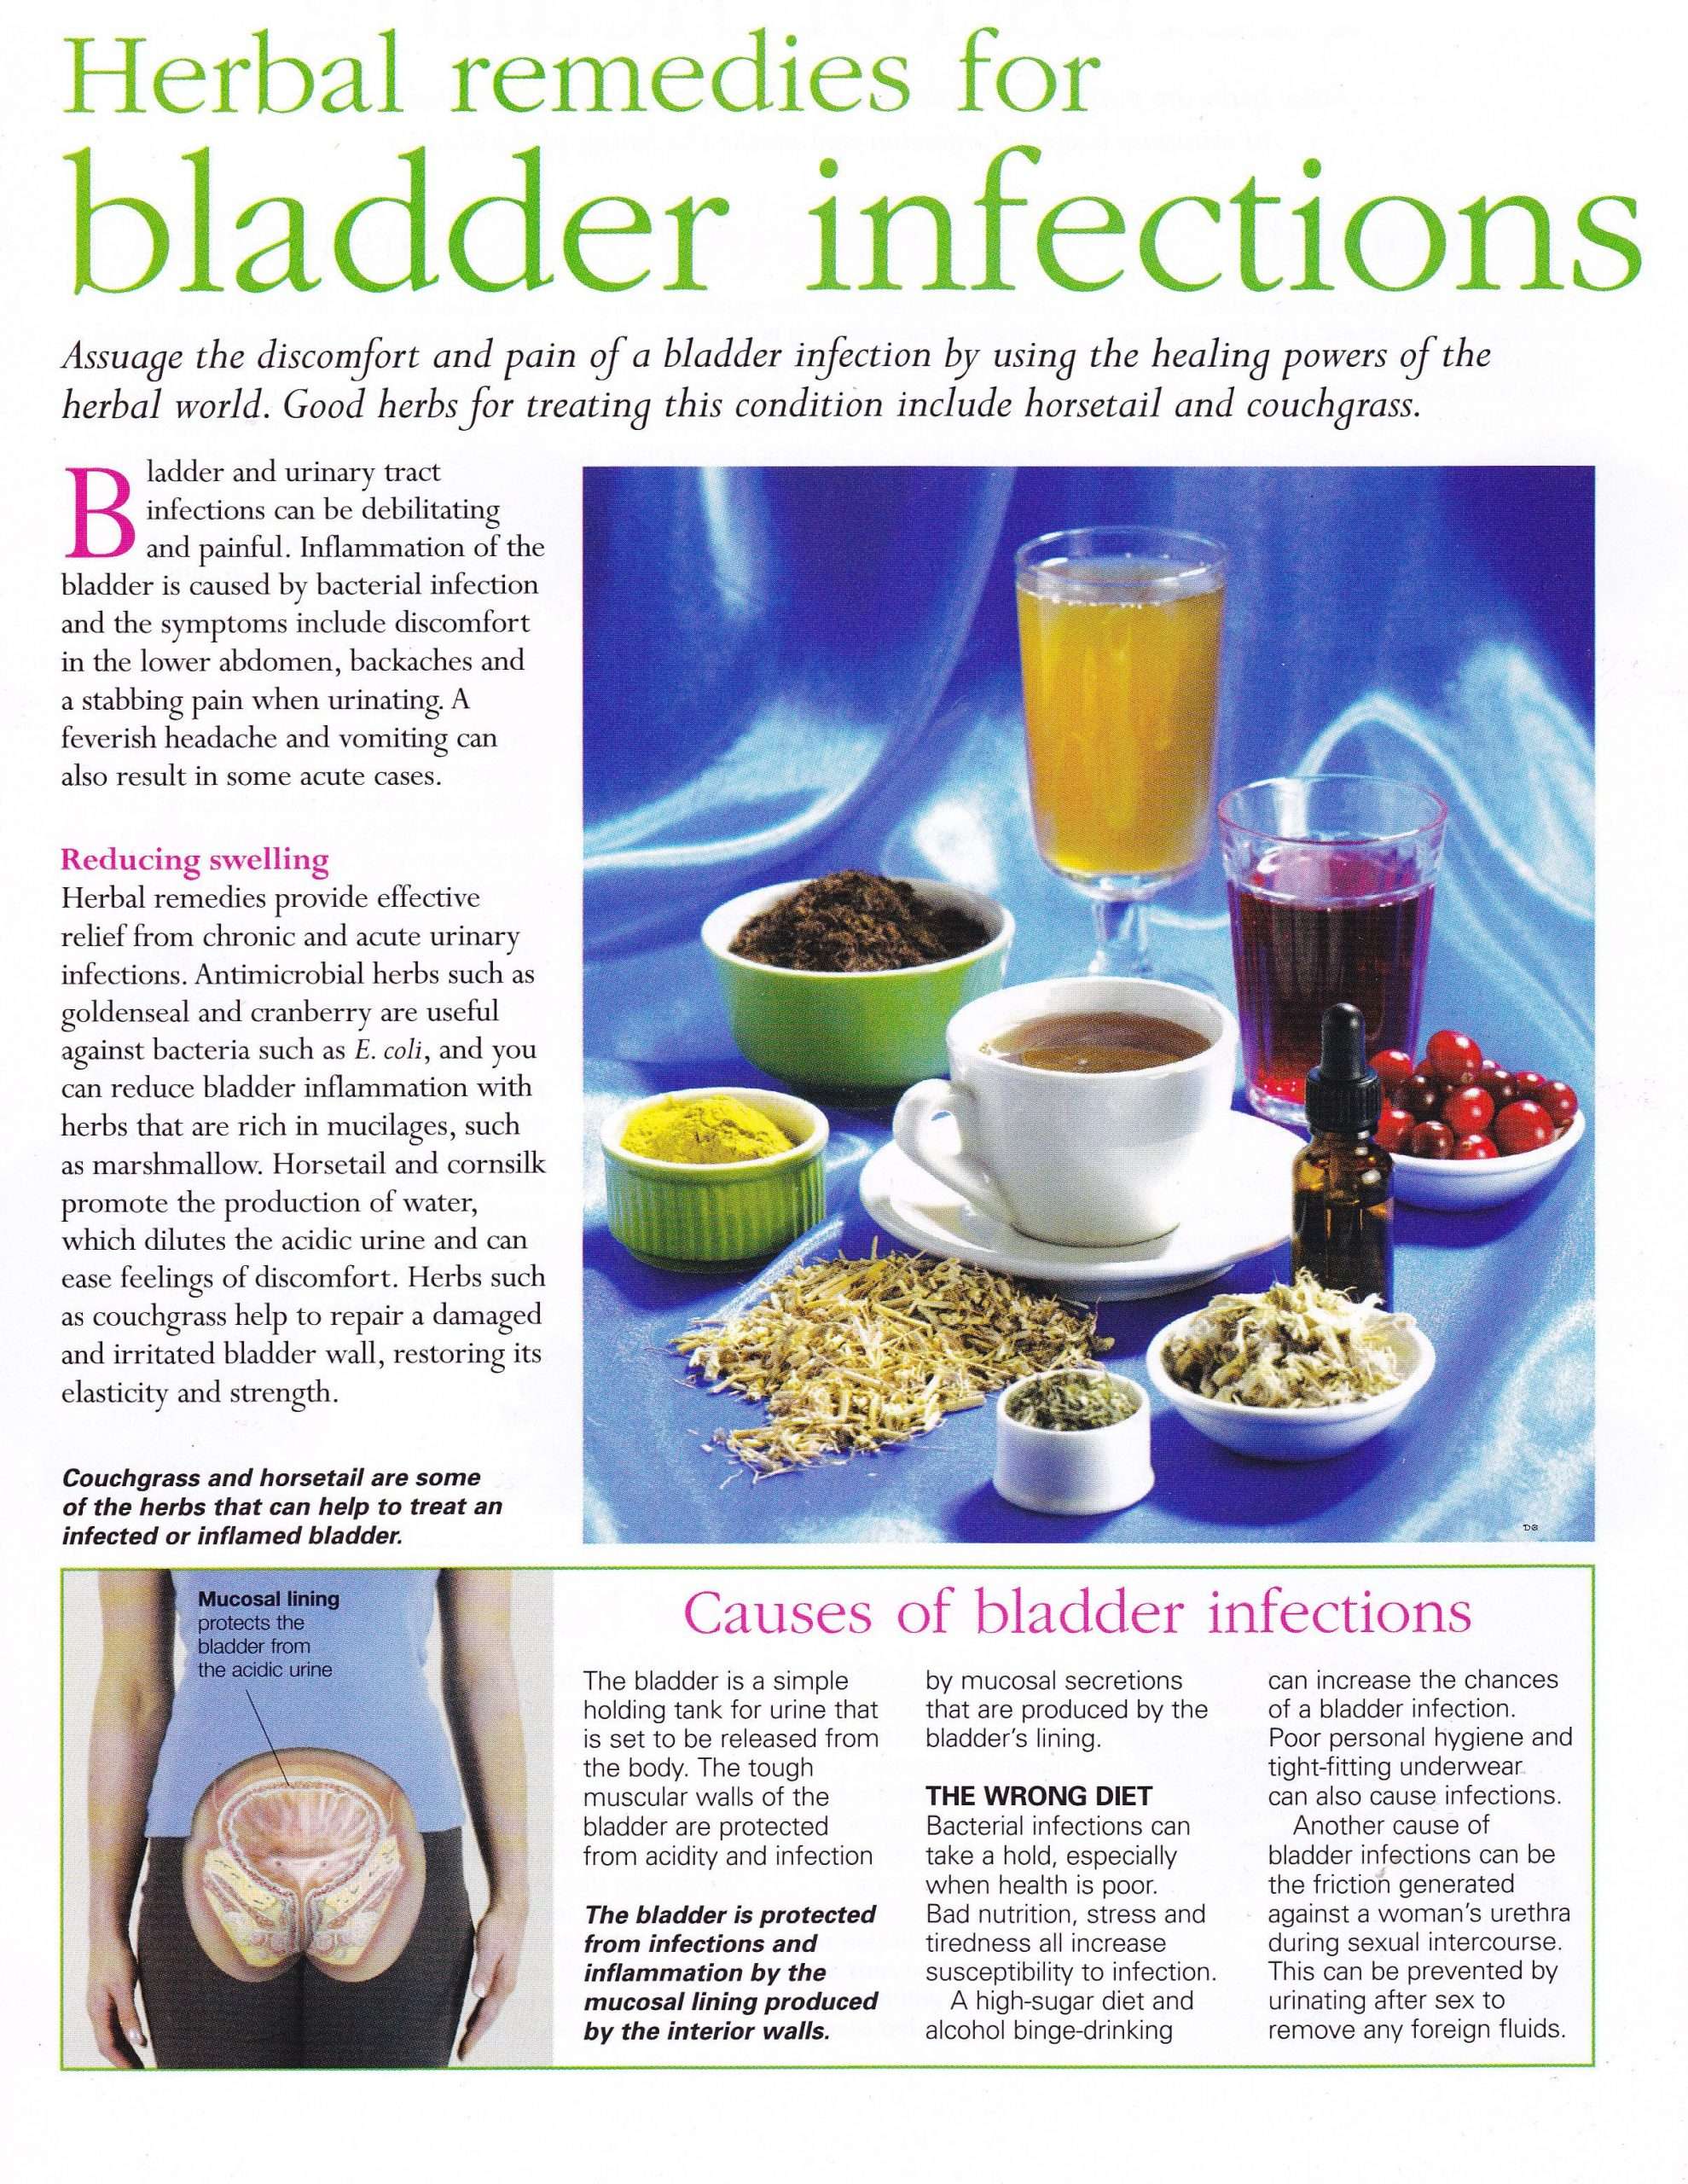 Herbal remedies for bladder infections